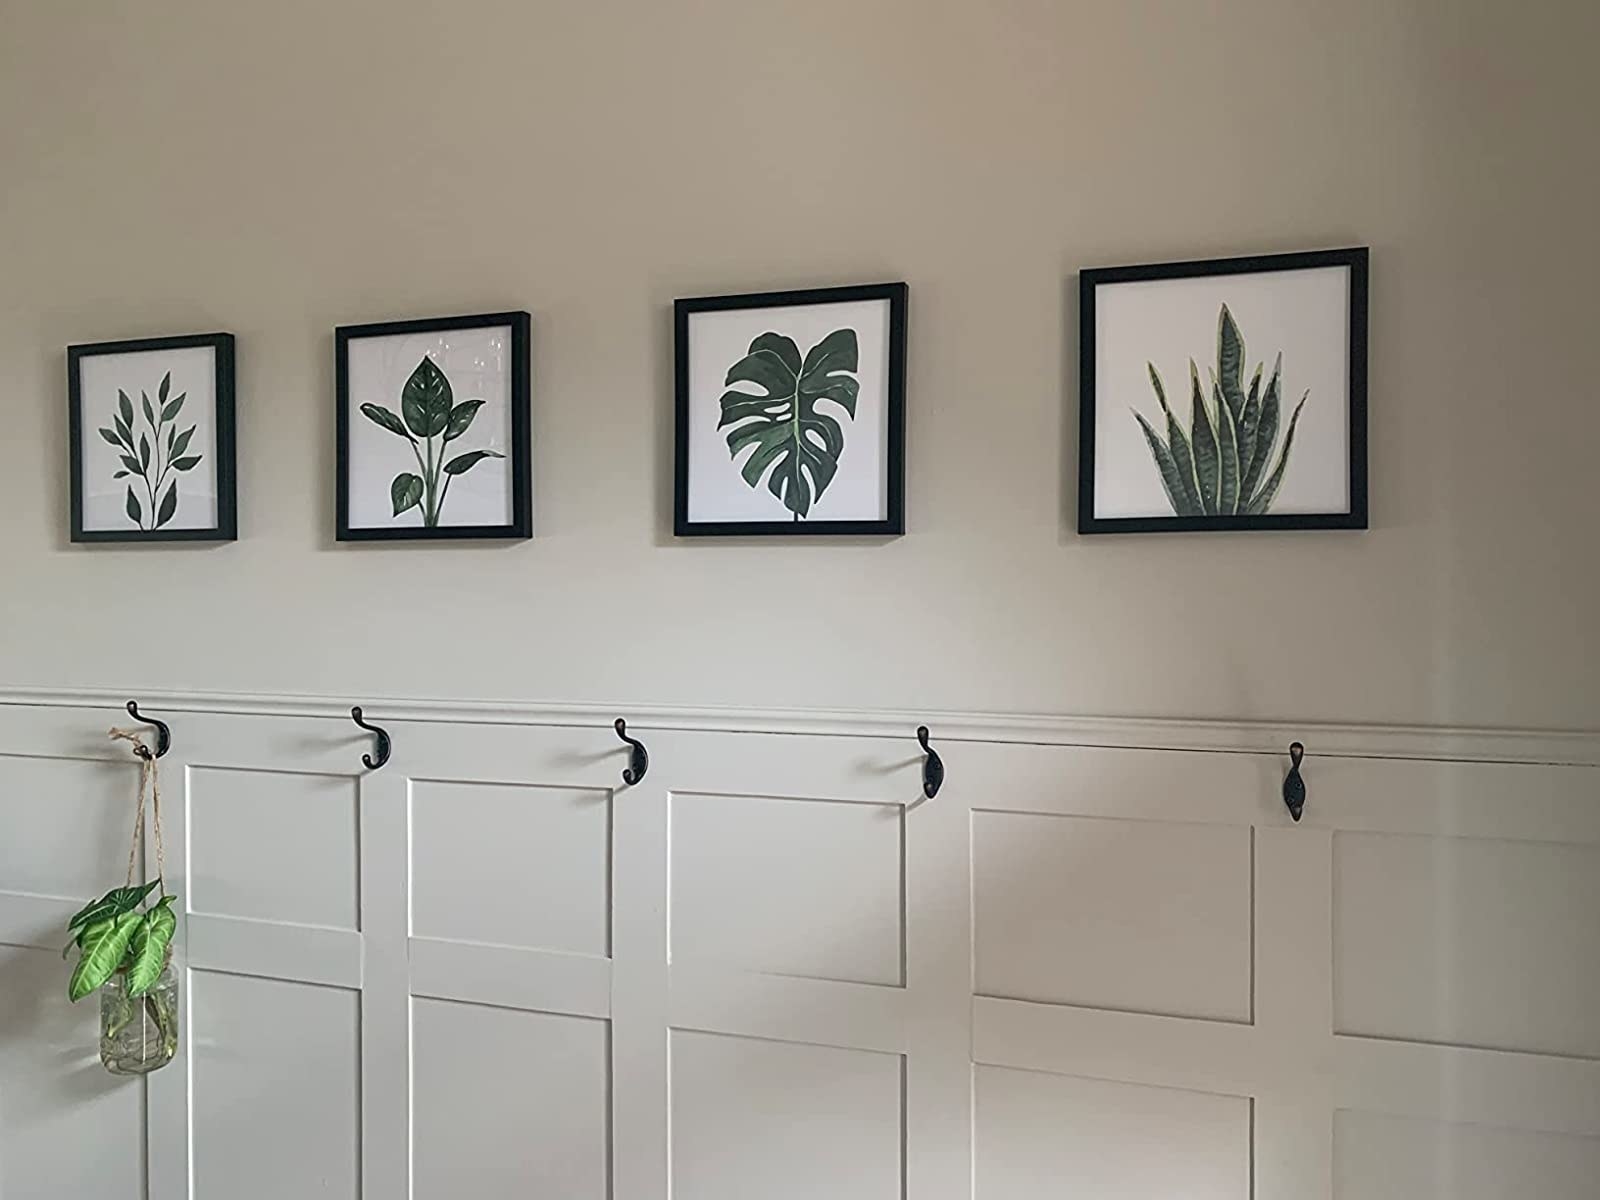 The prints displayed on a white wall above several coat hooks